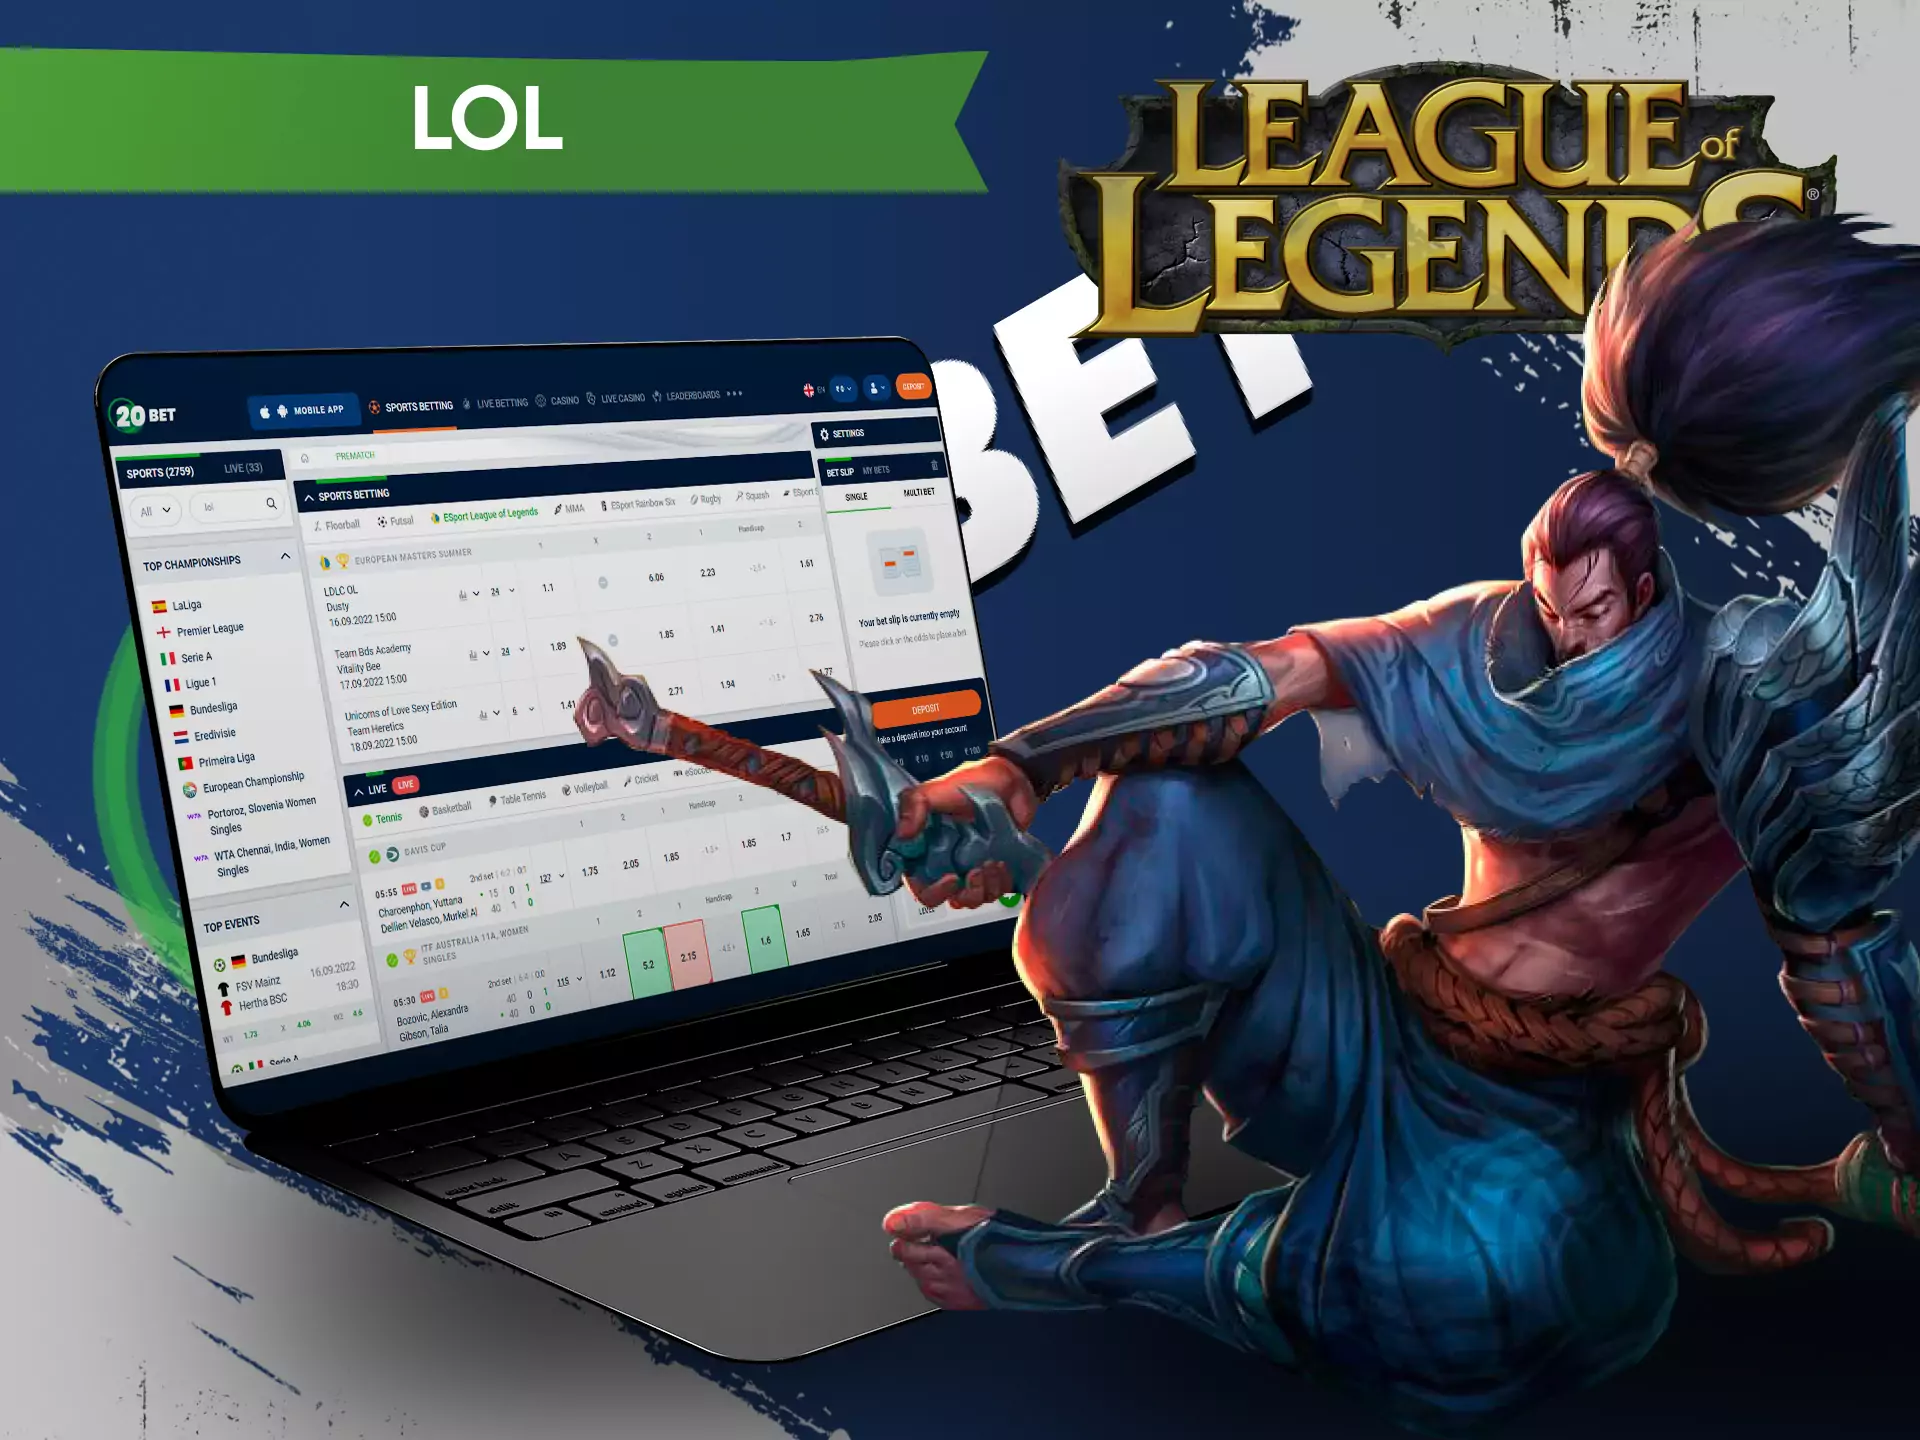 In the esports section of 20bet, you can bet on the League of Legends matches available for betting.